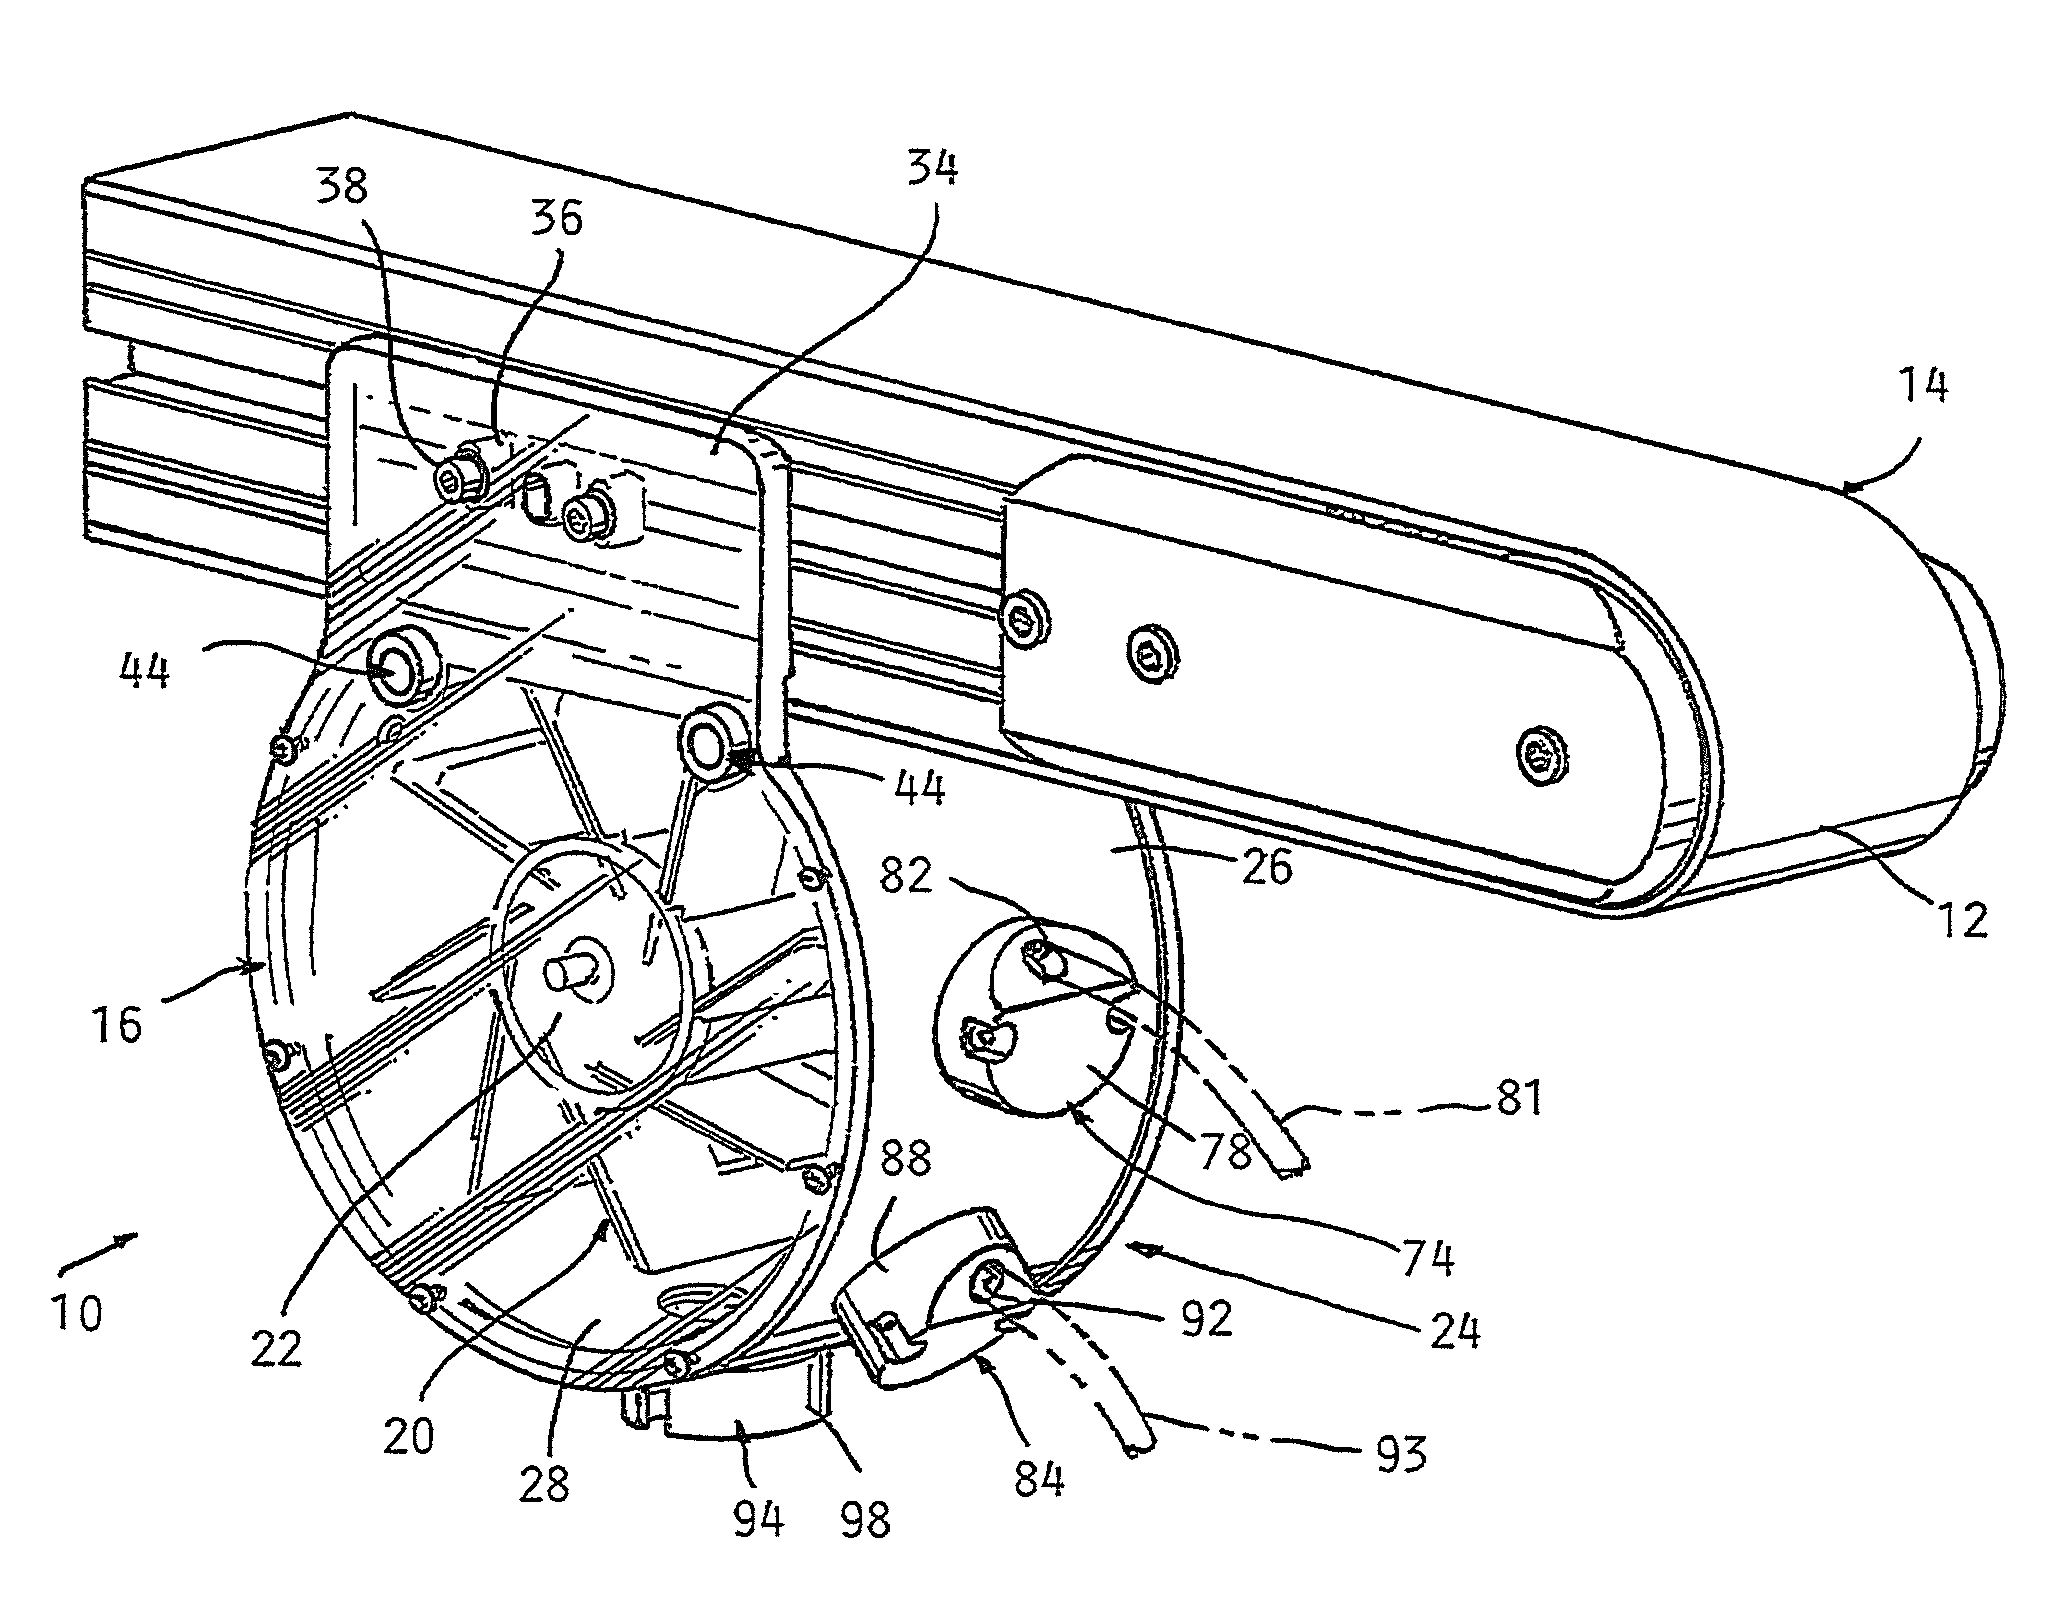 Apparatus for cleaning a conveyor belt